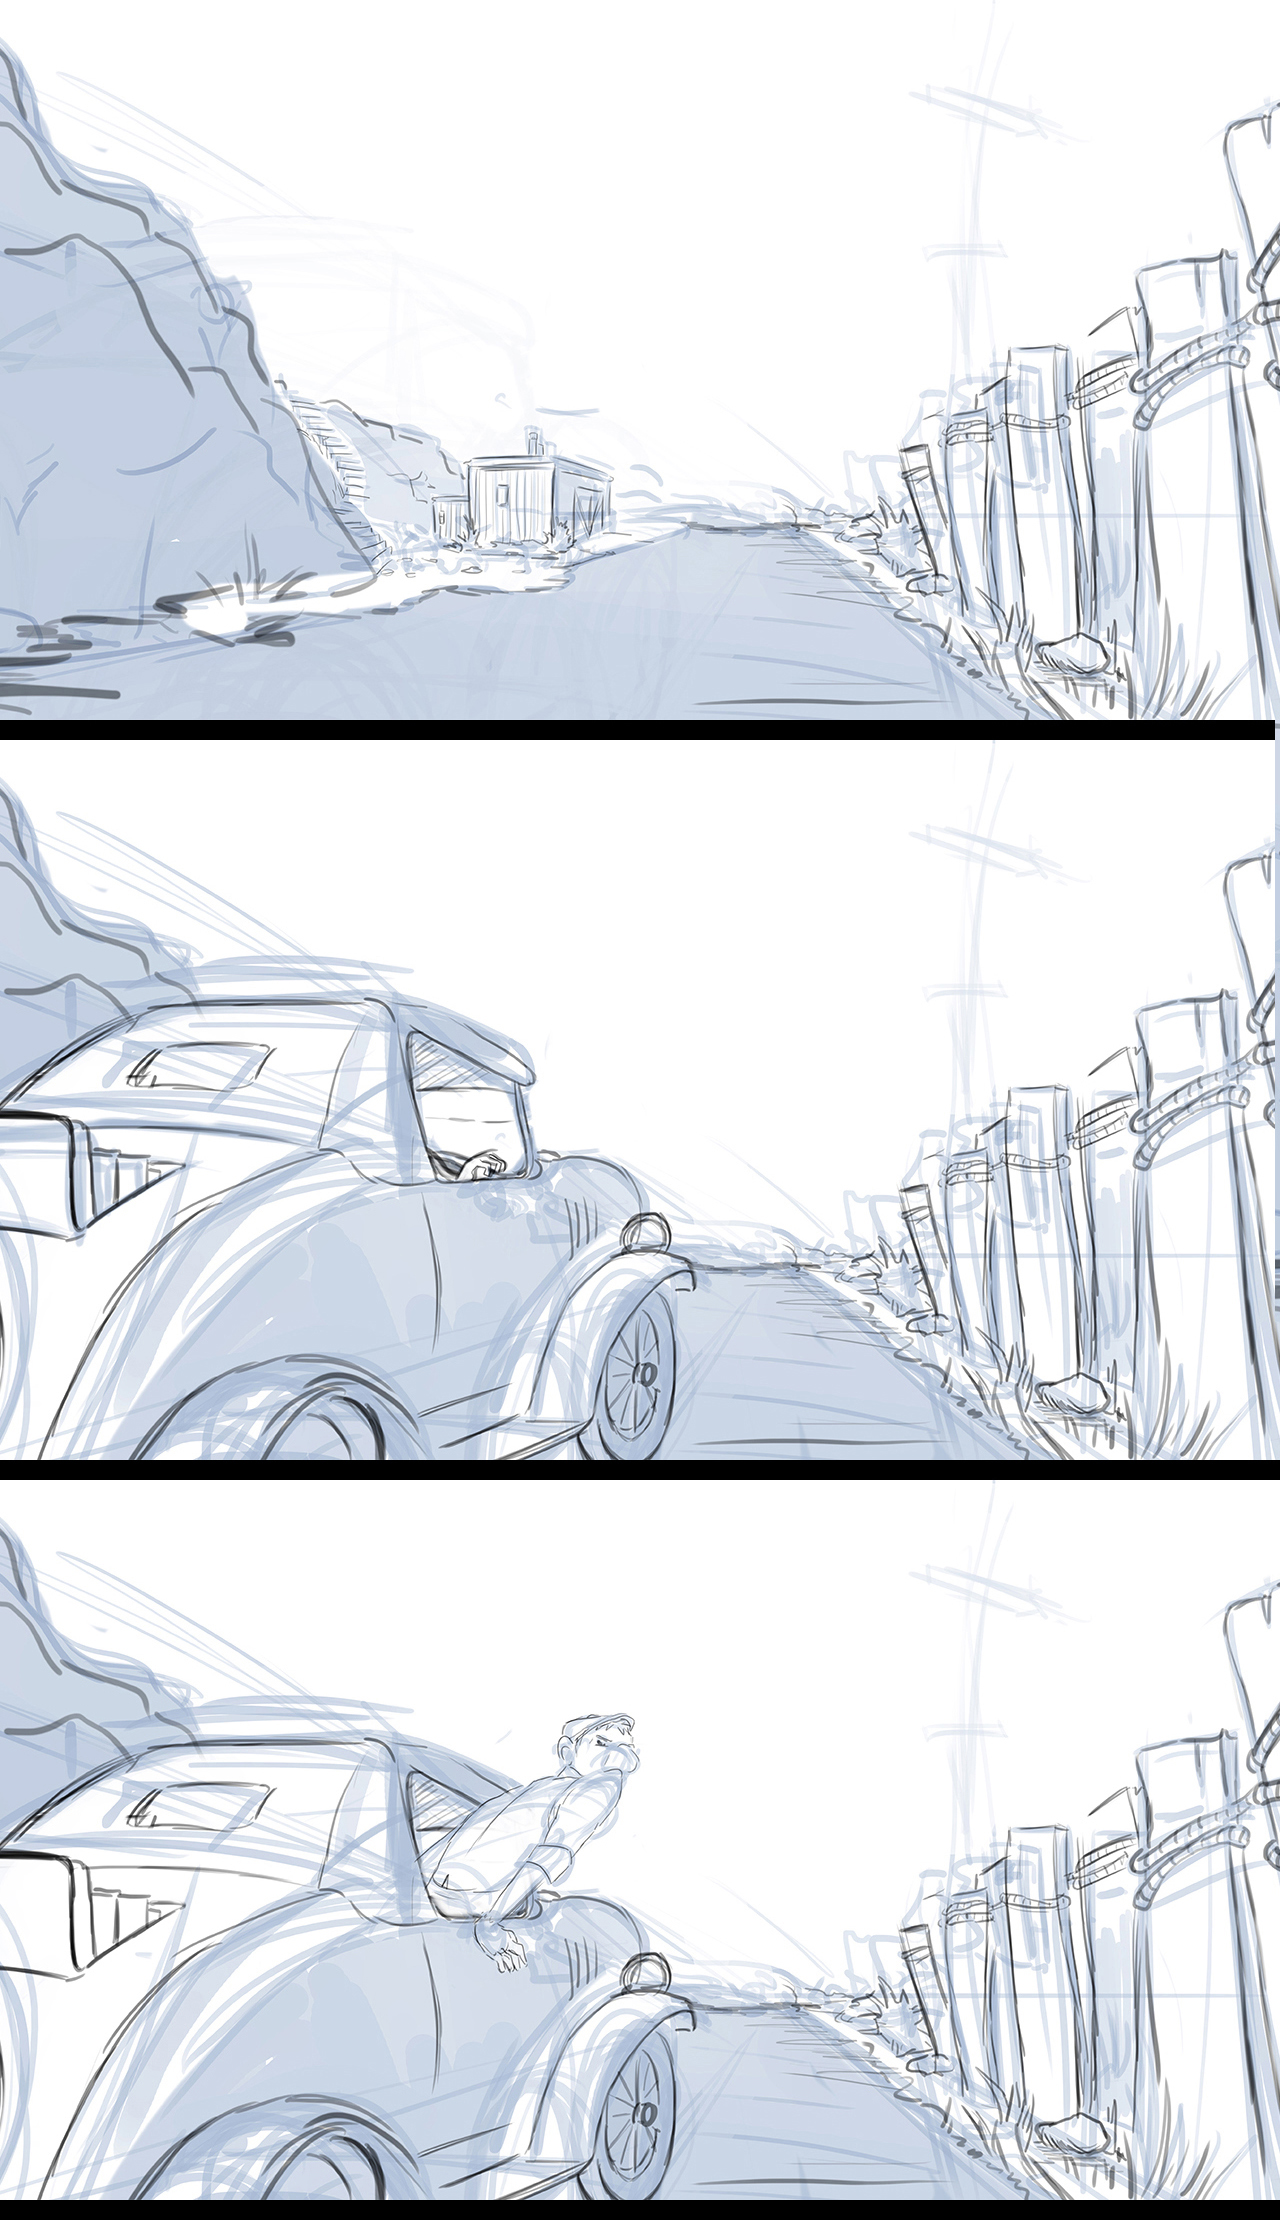 Storyboard sequence from an animated film. Sequence shows early 1920's car come to a sudden stop and a man pops out of the right window.